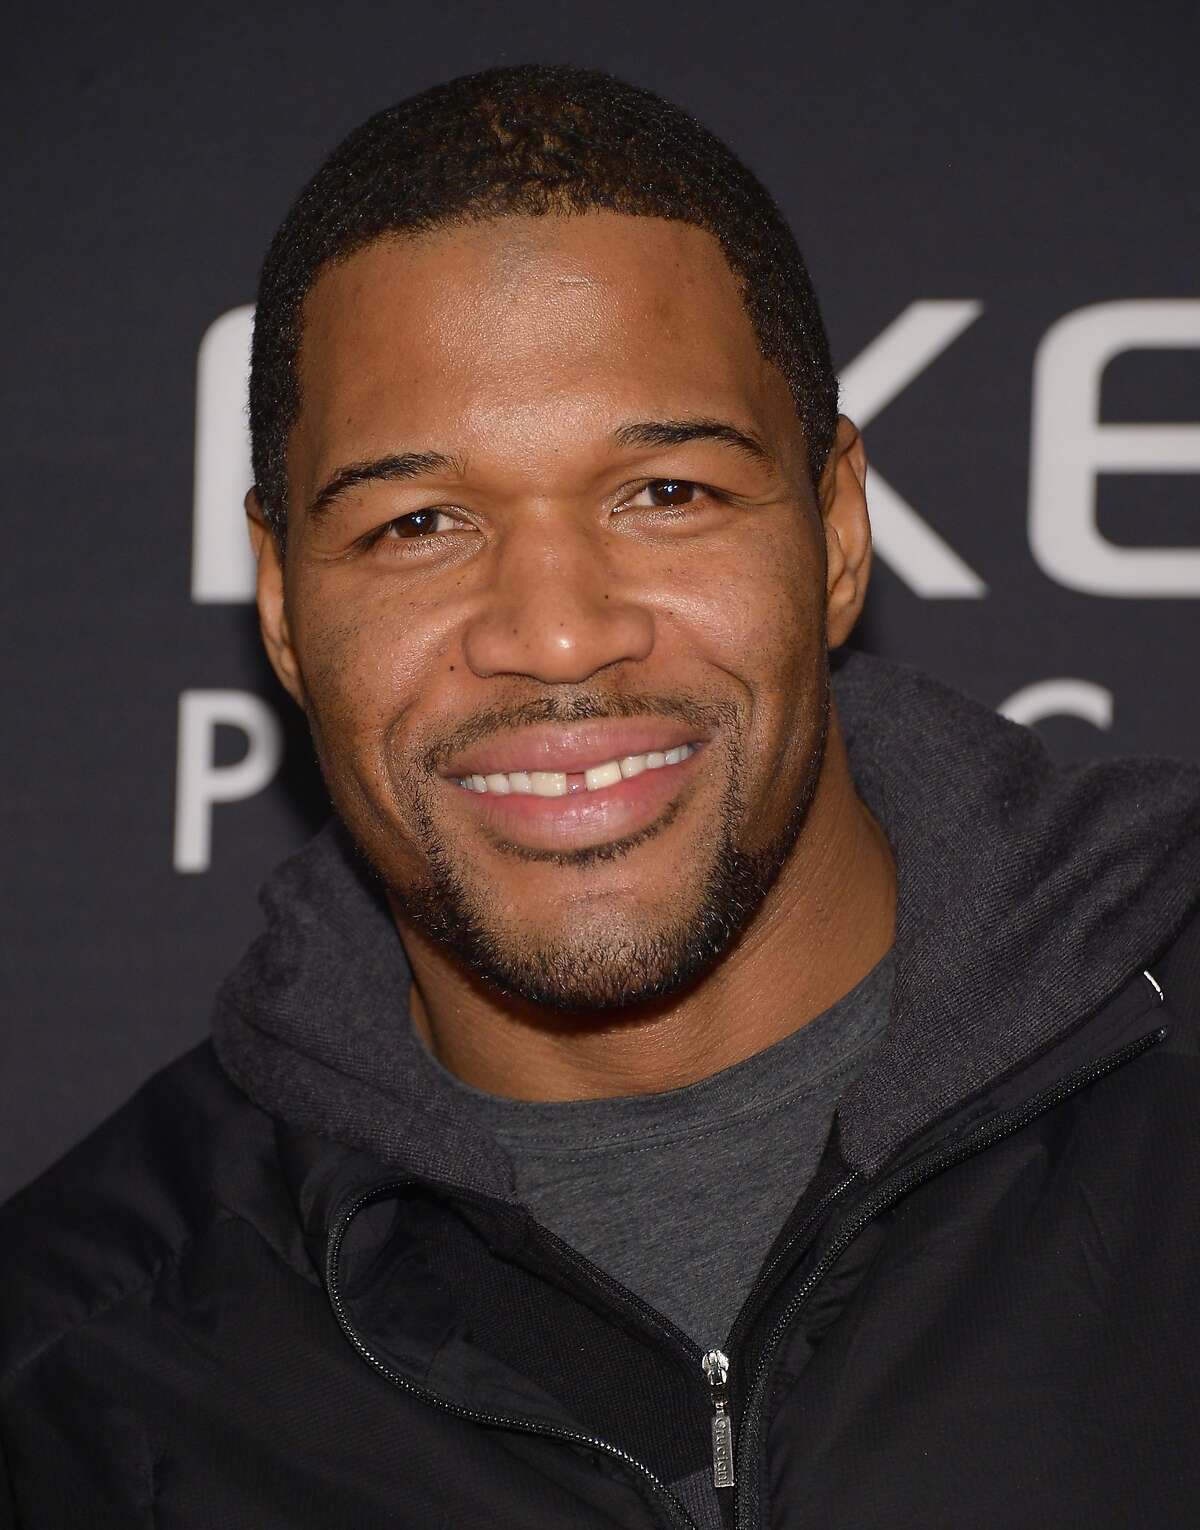 NEW YORK, NY - JANUARY 31: Michael Strahan attends the ESPN The Party at Basketball City - Pier 36 - South Street on January 31, 2014 in New York City. (Photo by Michael Loccisano/Getty Images For ESPN)